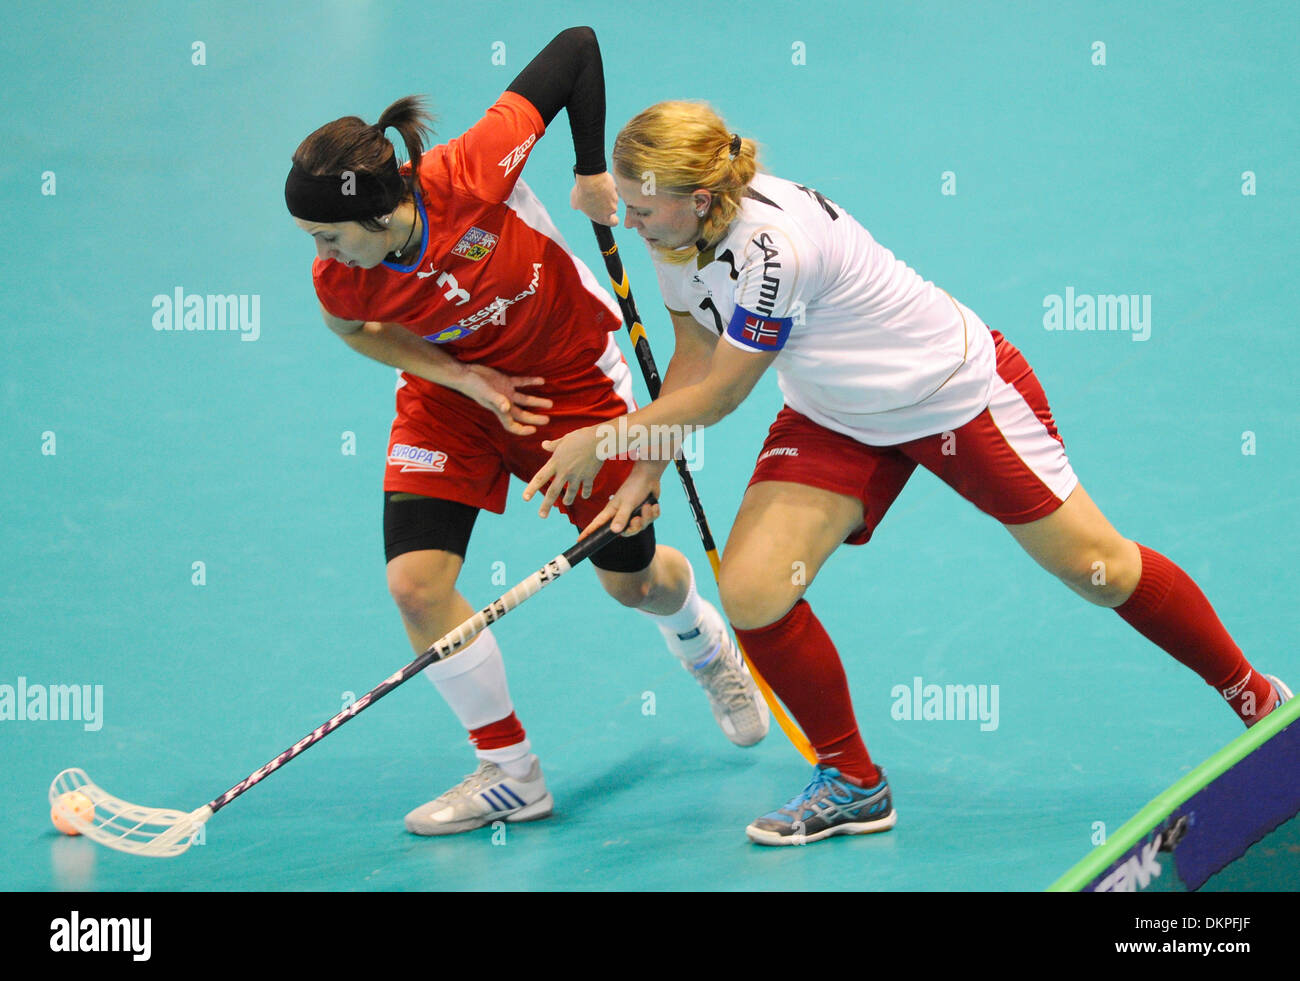 Brno, Czech Republic. 7th Dec, 2013. Norway's player Anette Berg, right, and Gabriela Zurkova of Czech Republic fight for the ball during the Women's World Floorball Championships B group match played in Brno, Czech Republic, December 7, 2013. © Vaclav Salek/CTK Photo/Alamy Live News Stock Photo